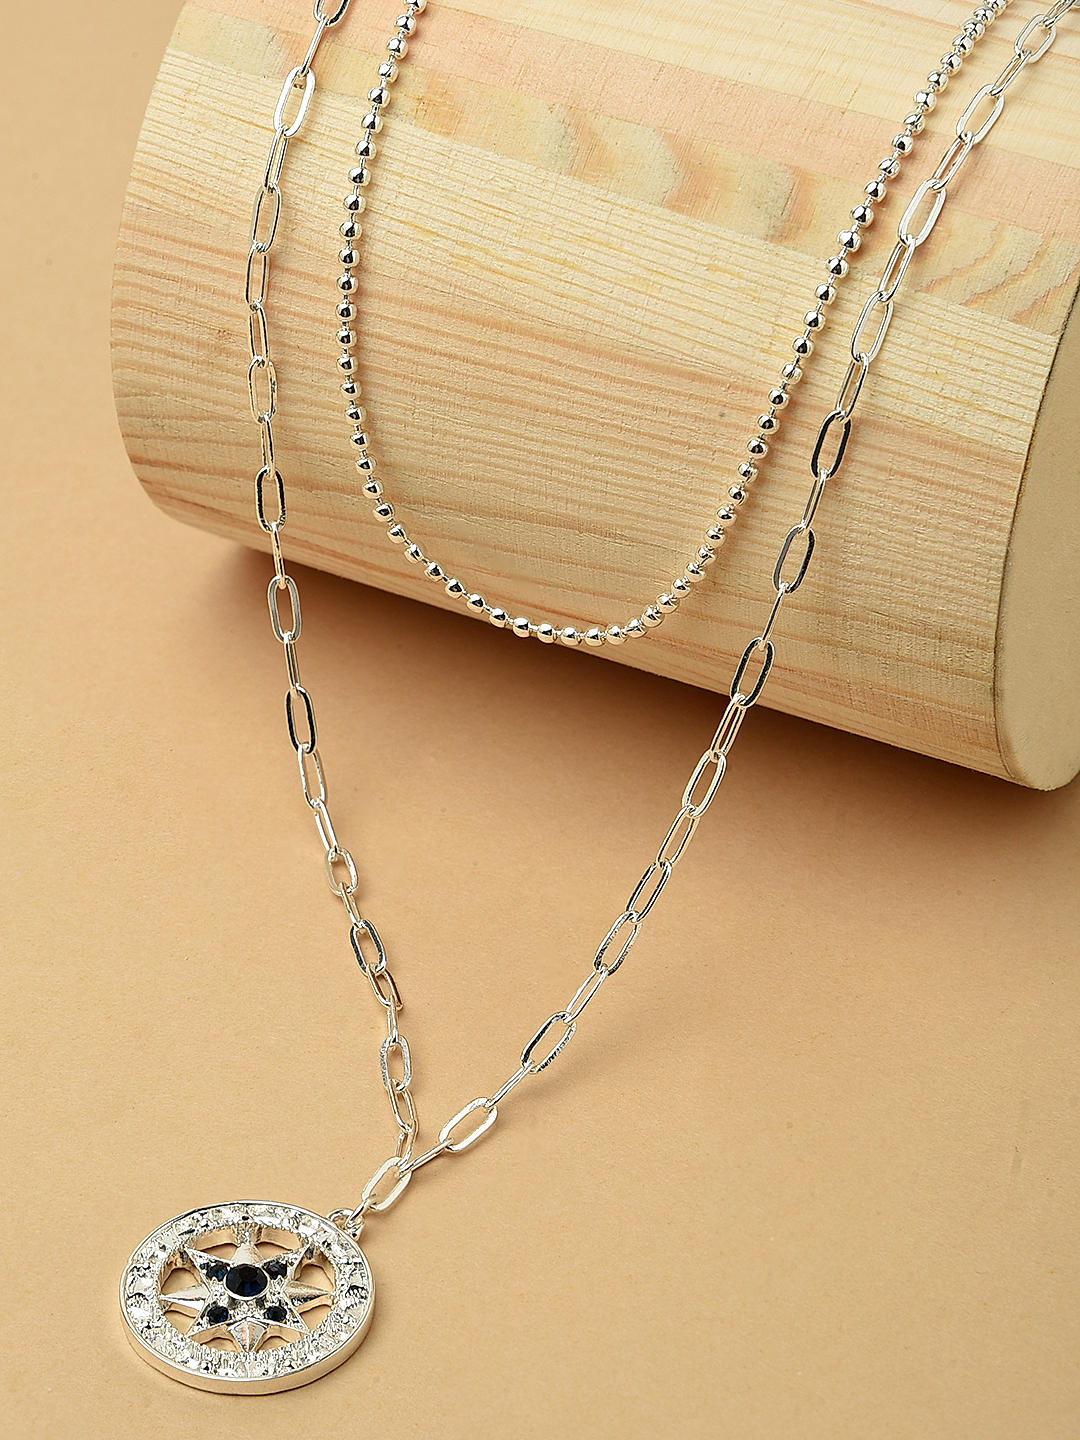 Black Thread Chain with Oxidized German Silver Pendant - Sasitrends |  Sasitrends